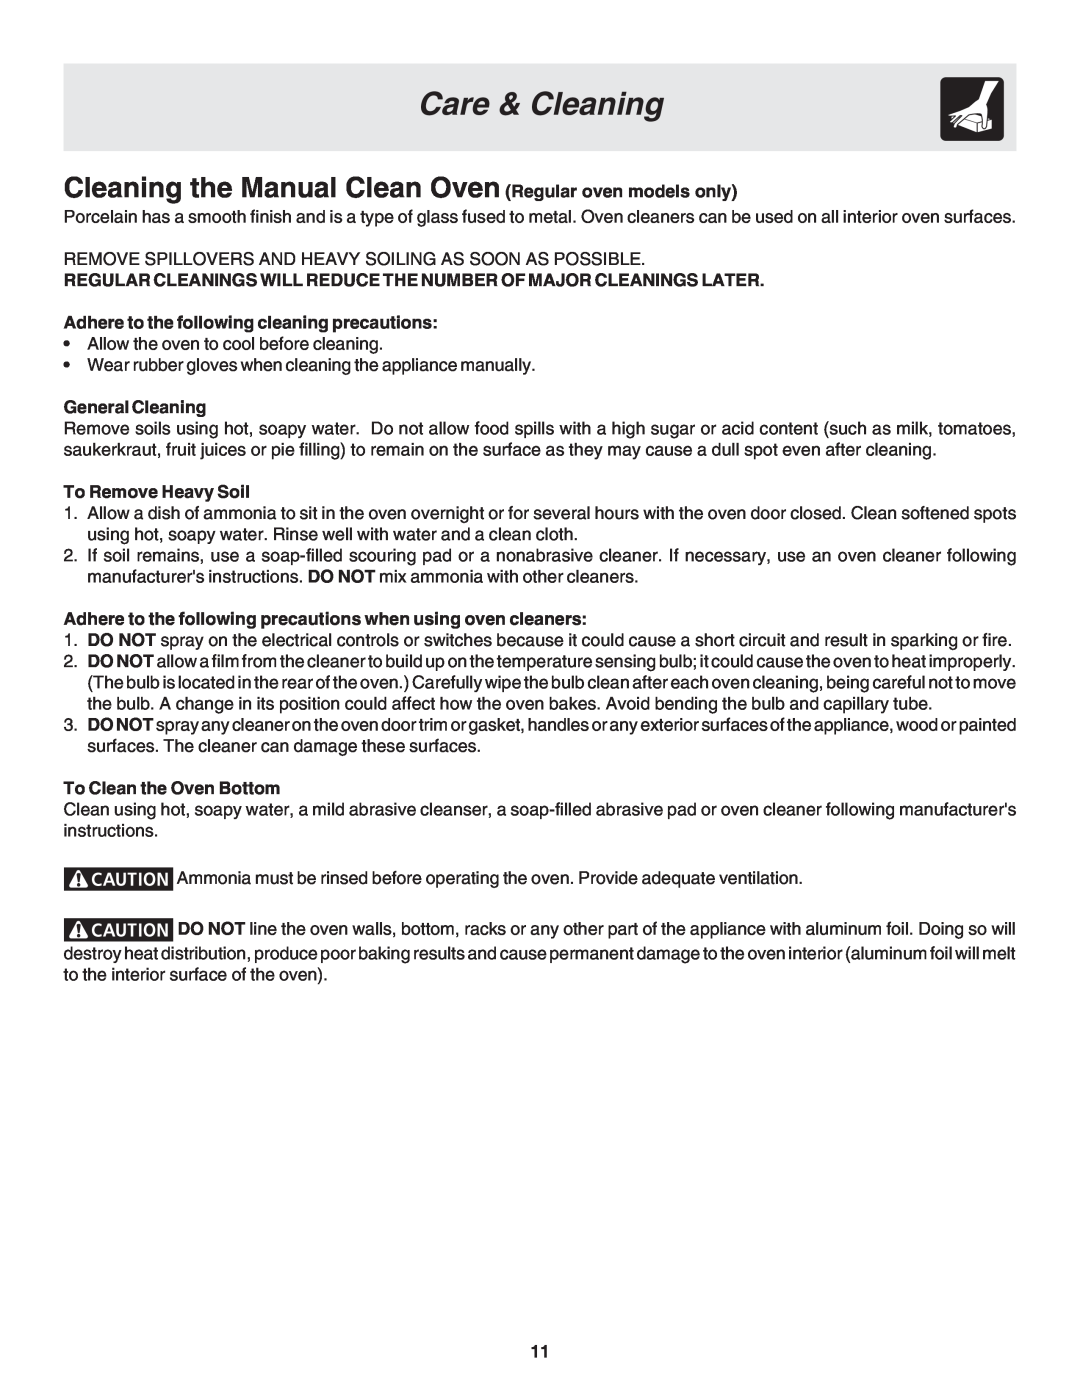 Frigidaire 318205121 Cleaning the Manual Clean Oven Regular oven models only, General Cleaning, To Remove Heavy Soil 